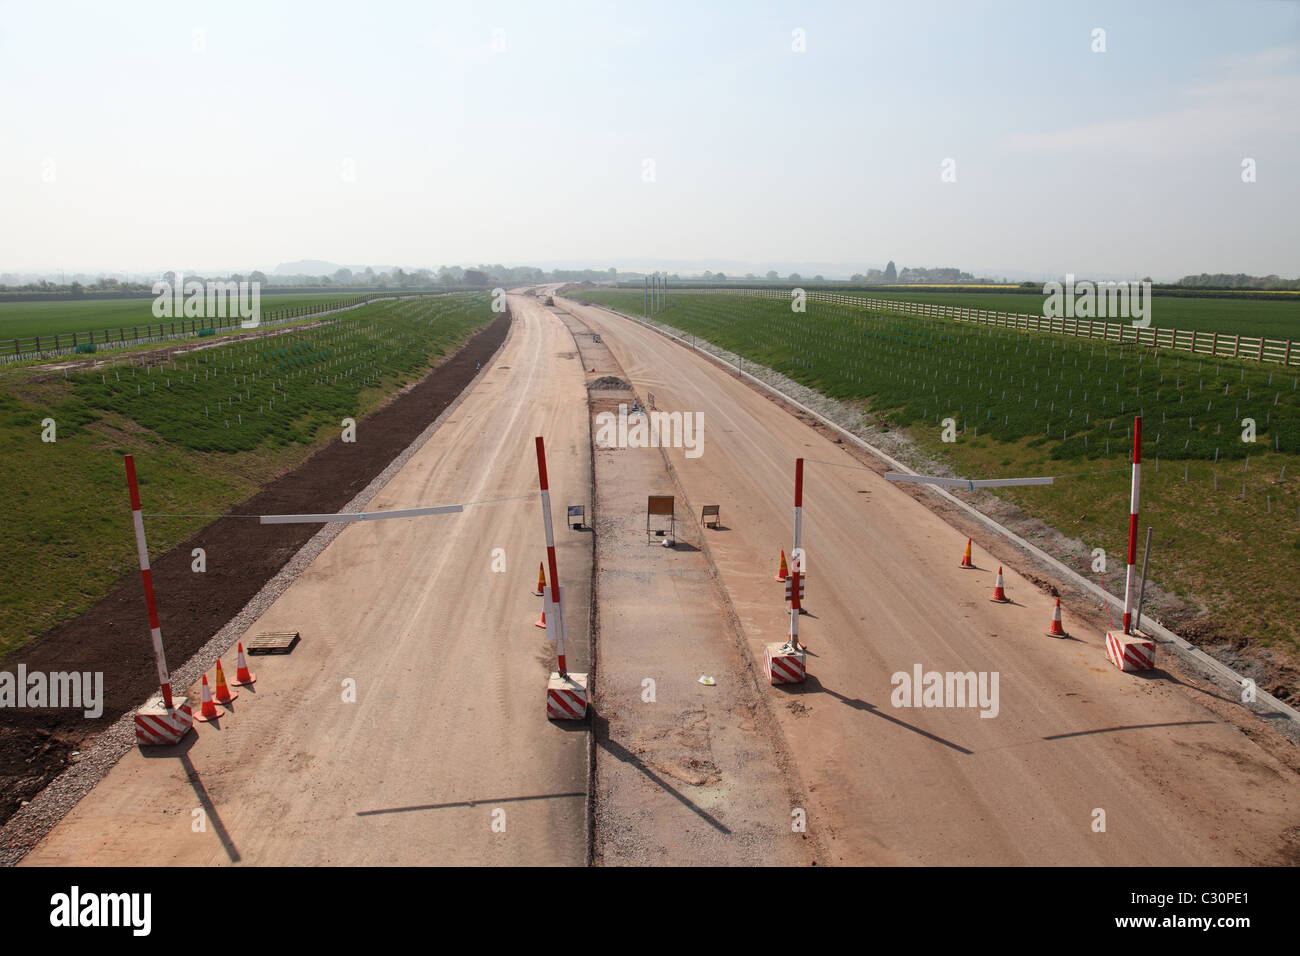 The new A46 dual carriageway road building in Nottinghamshire, England, U.K. Stock Photo